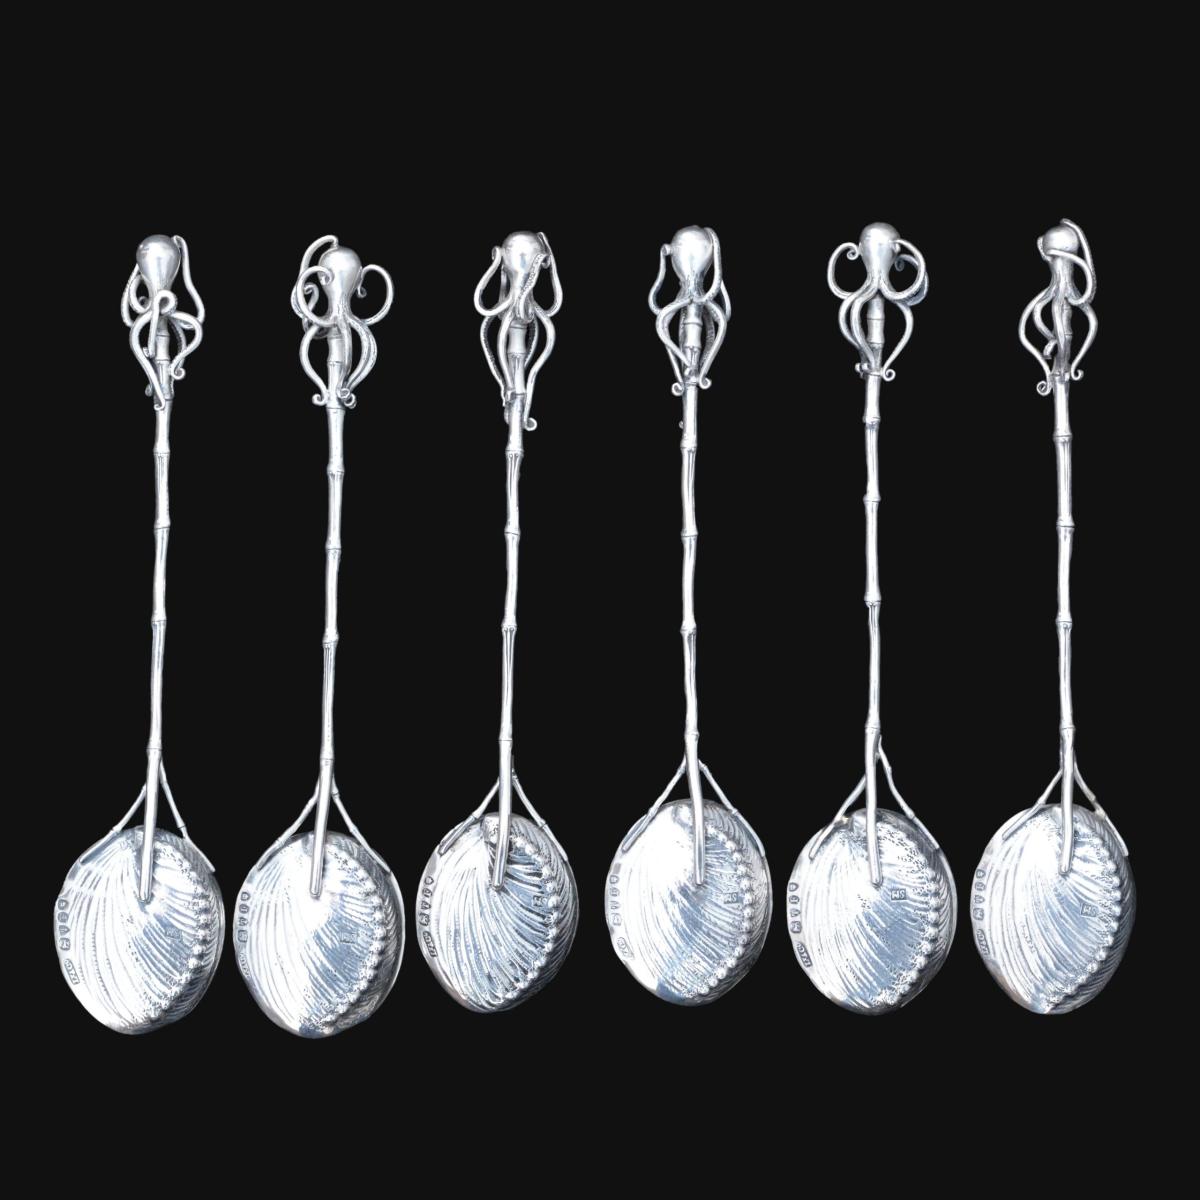 Japanese silver octopus spoons retailed by Liberty & Co